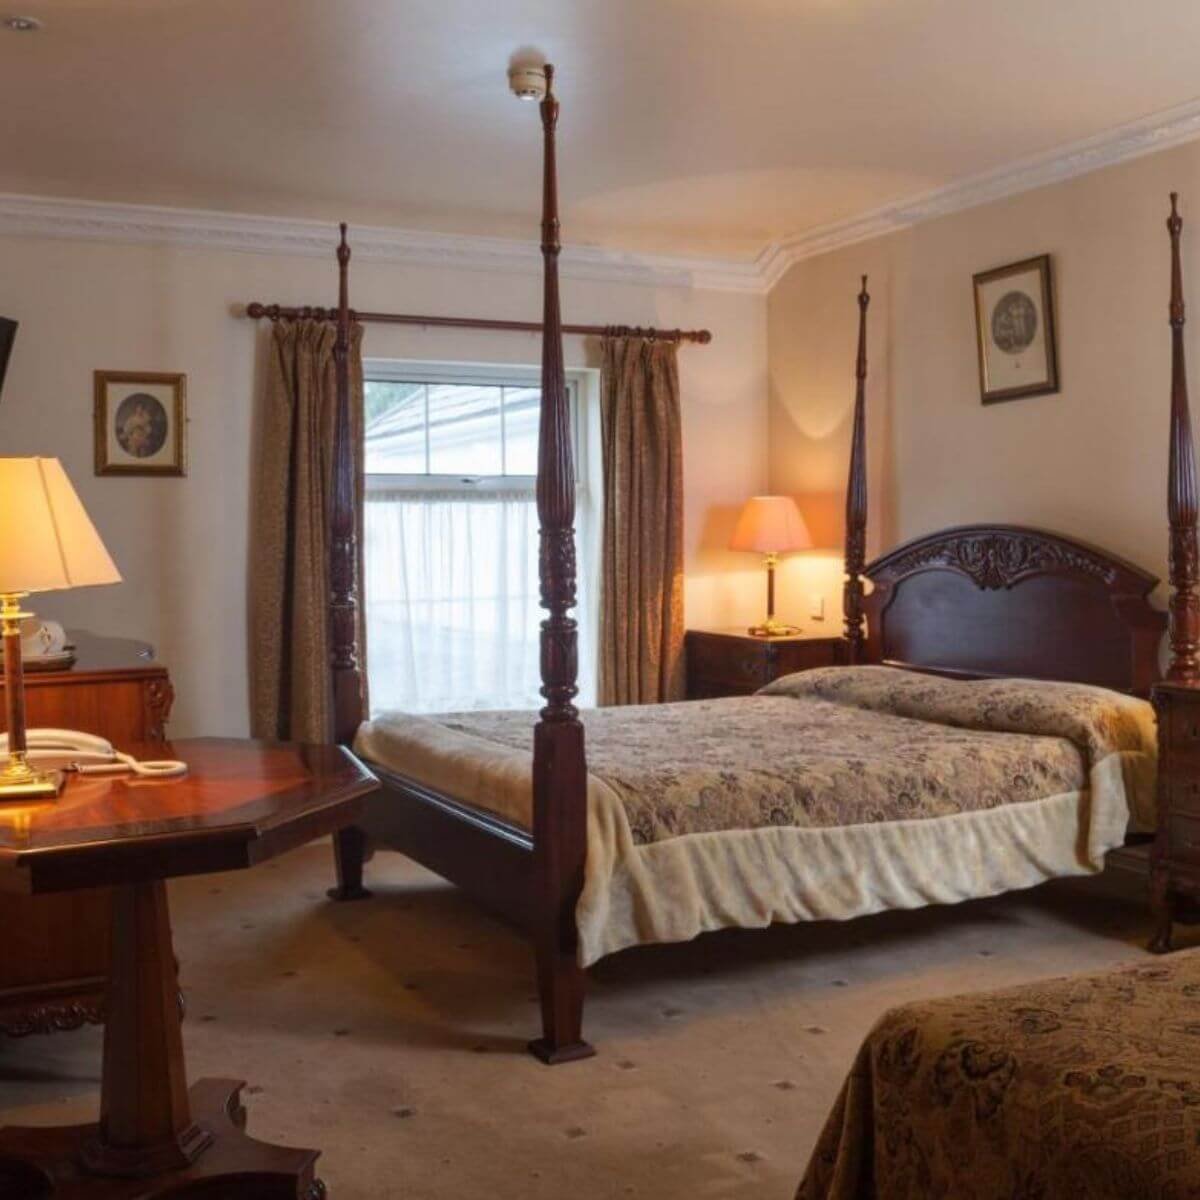 The interior of a room at the mills inn